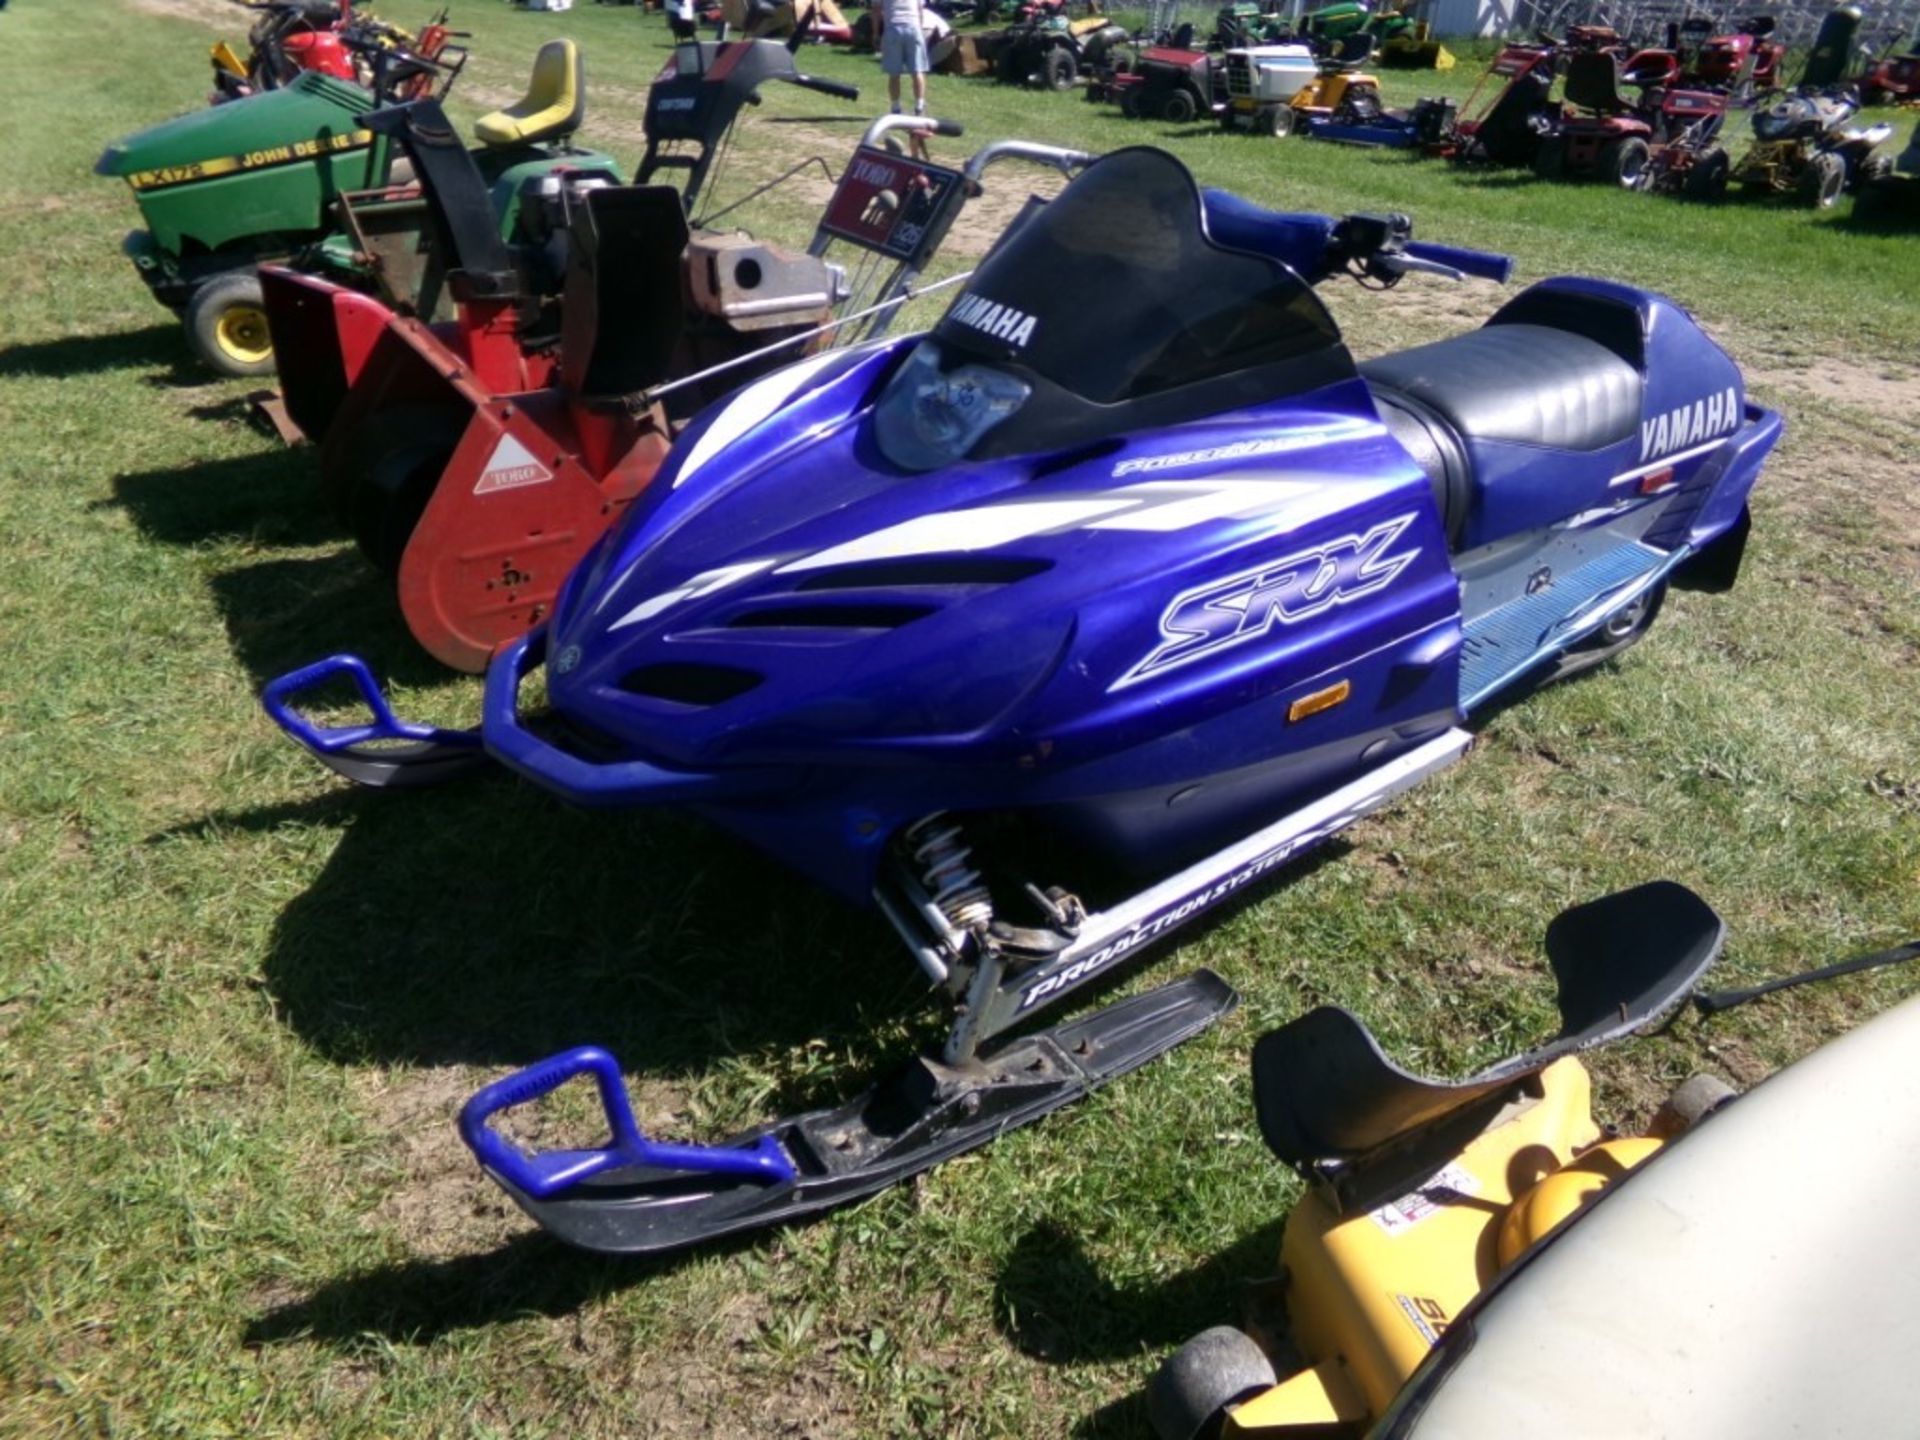 2001 Yamaha SRX 700 Snowmobile, 1882 Miles, with Registration, Vin # 8DN015520 (6136) - HAVE